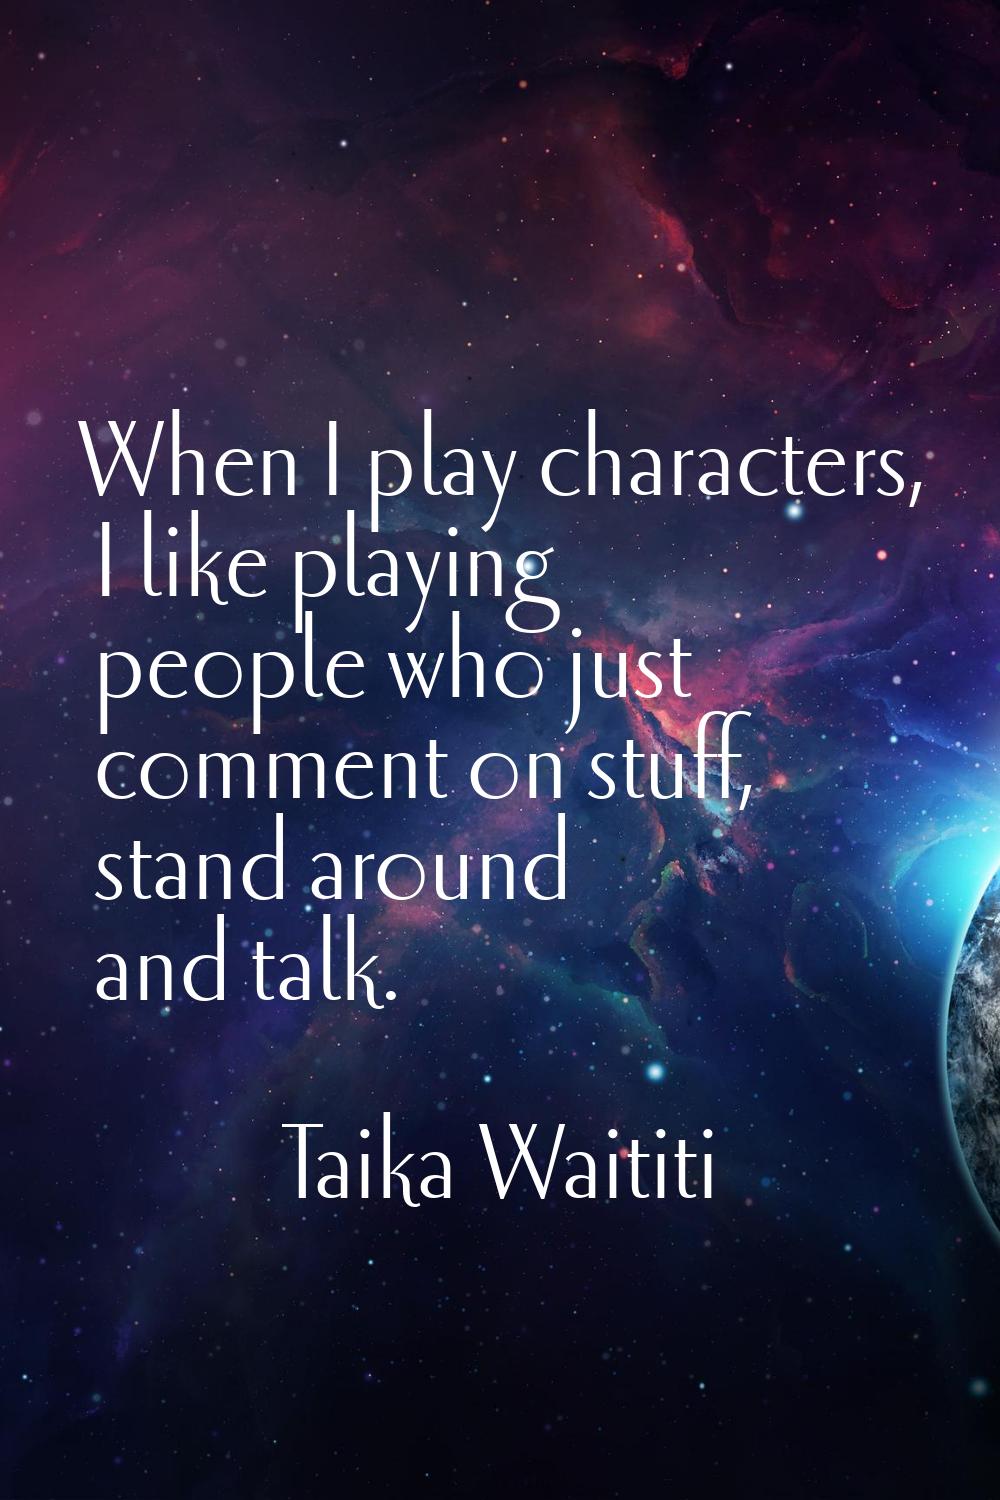 When I play characters, I like playing people who just comment on stuff, stand around and talk.